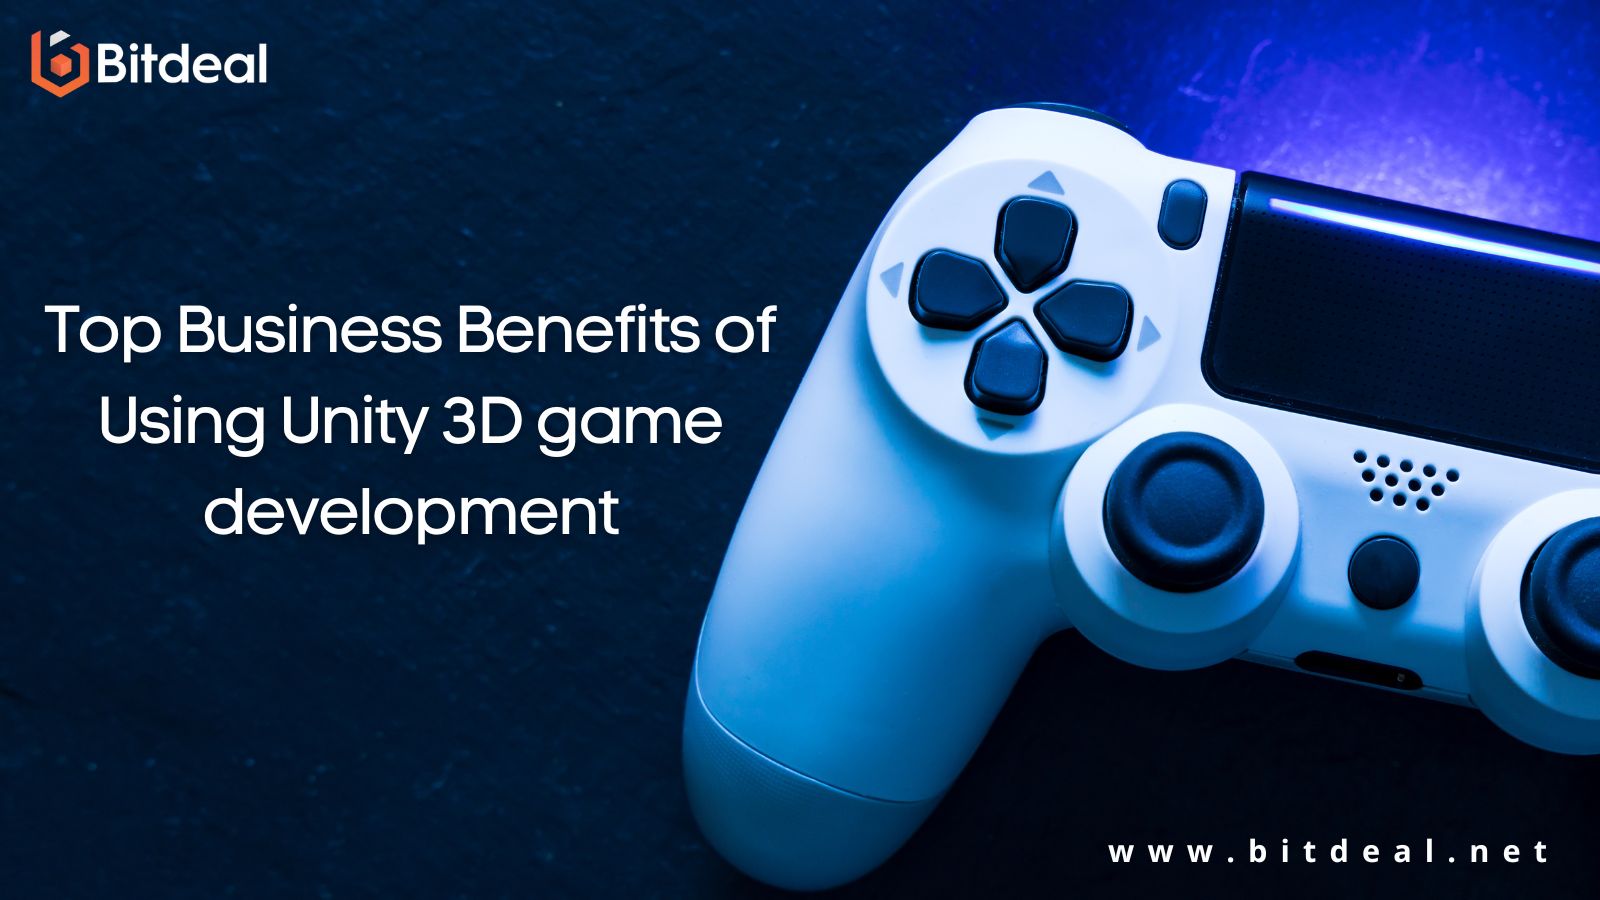 Top Business Benefits of Using Unity 3D game development